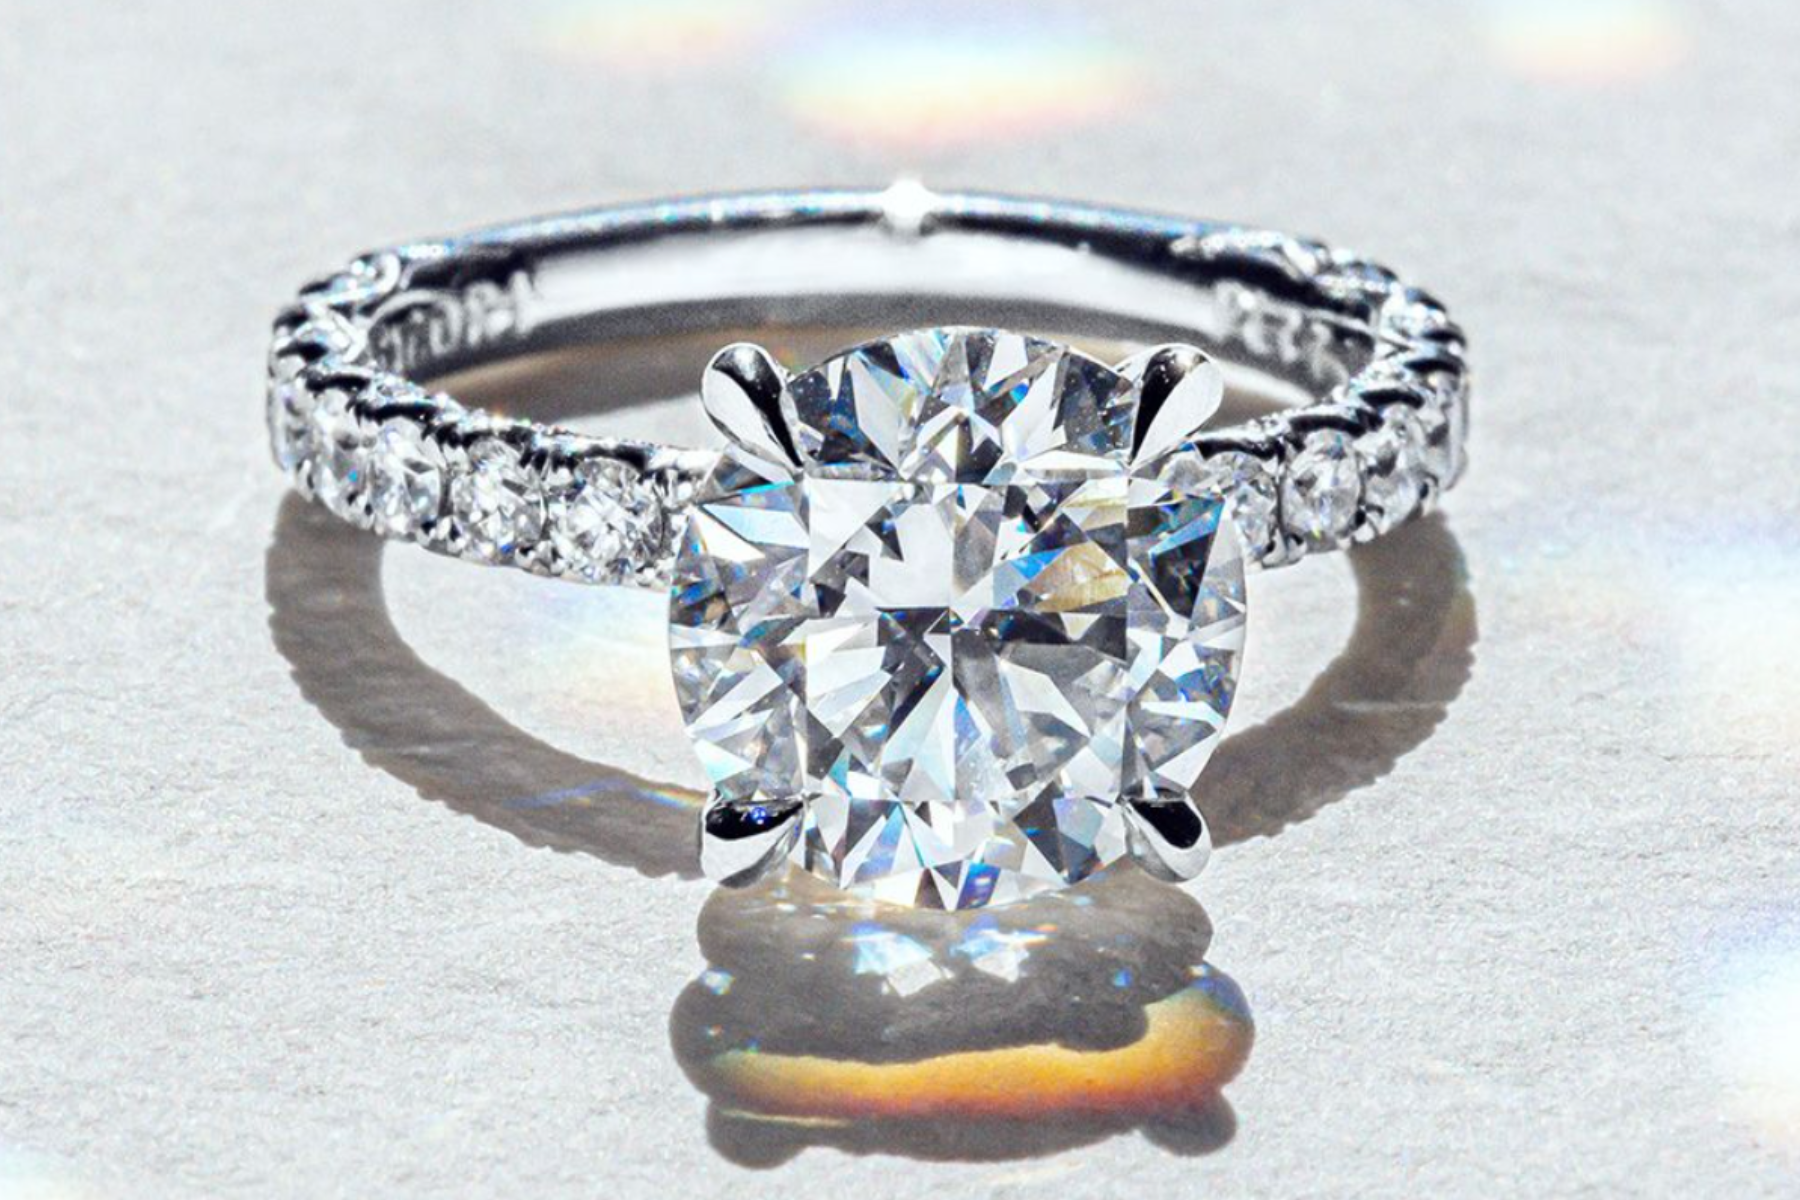 A diamond ring with a round brilliant cut